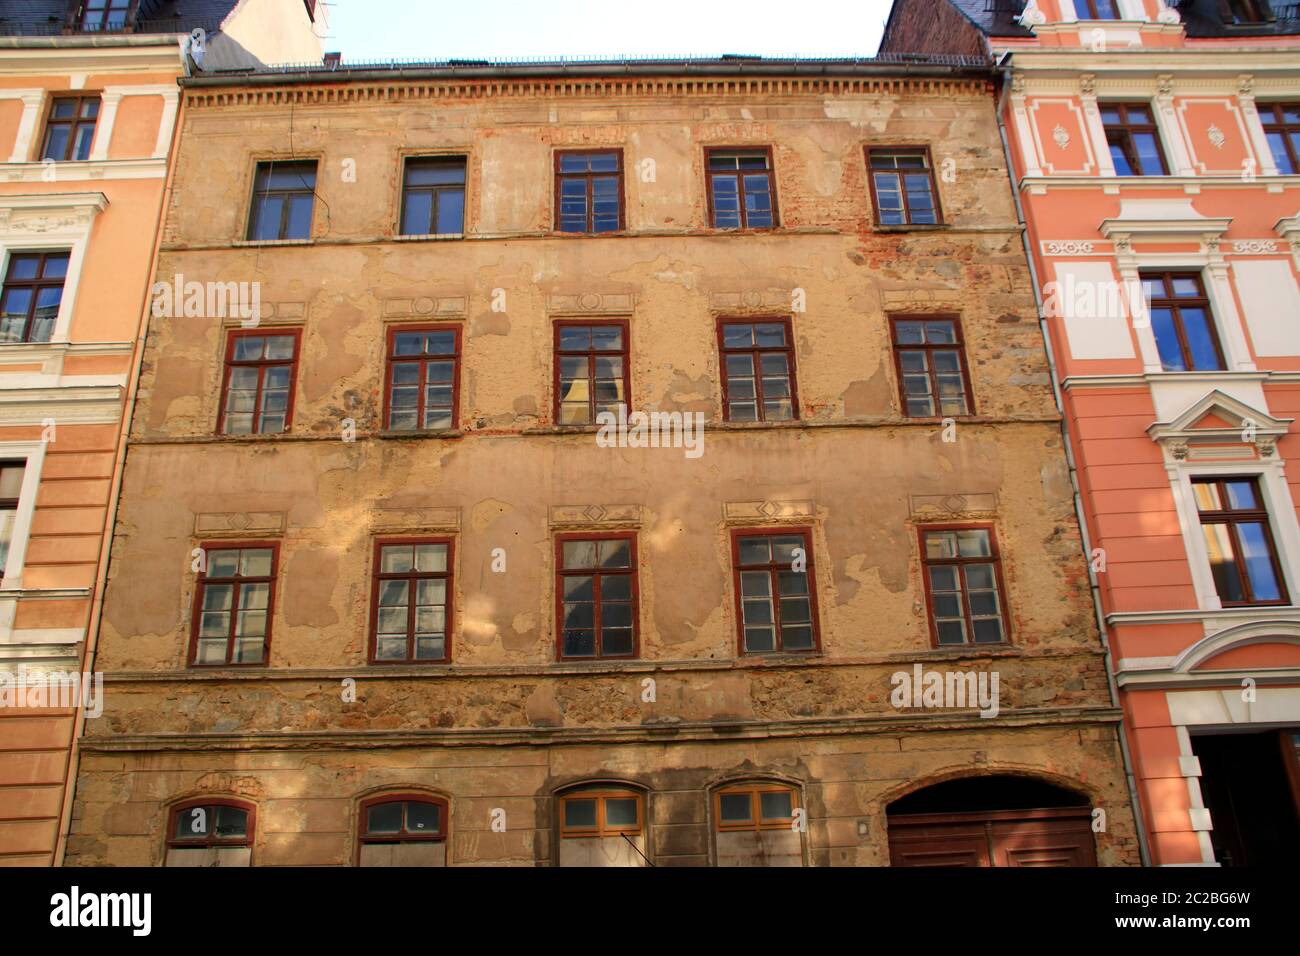 Old building in the town of GÃ¶rlitz, which needs renovation Stock Photo